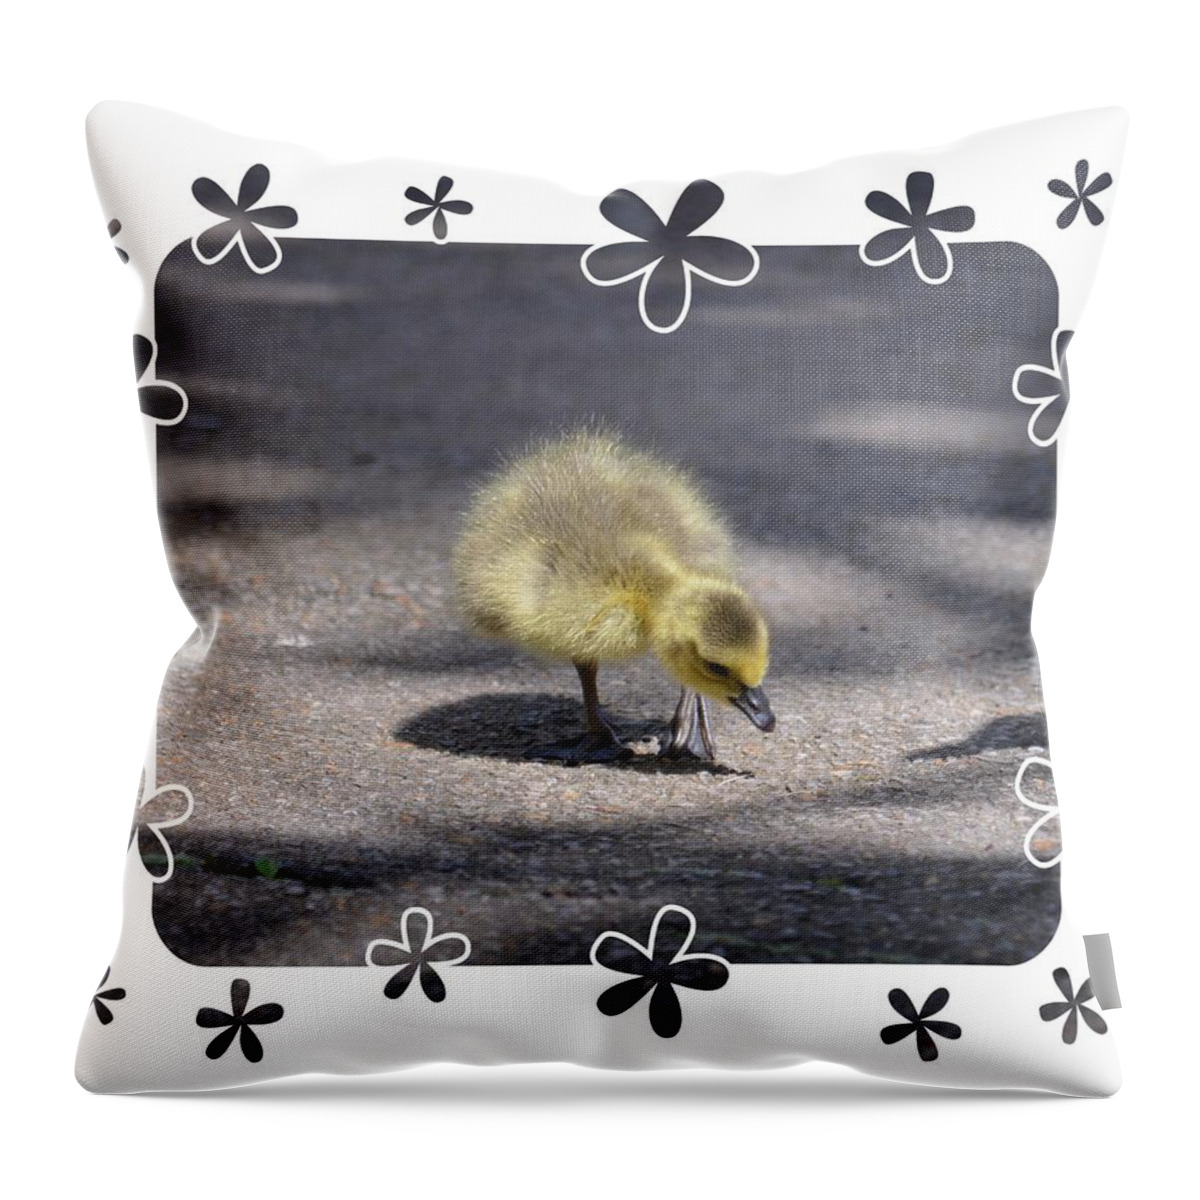 Gosling Ii Throw Pillow featuring the photograph Gosling II by Maria Urso